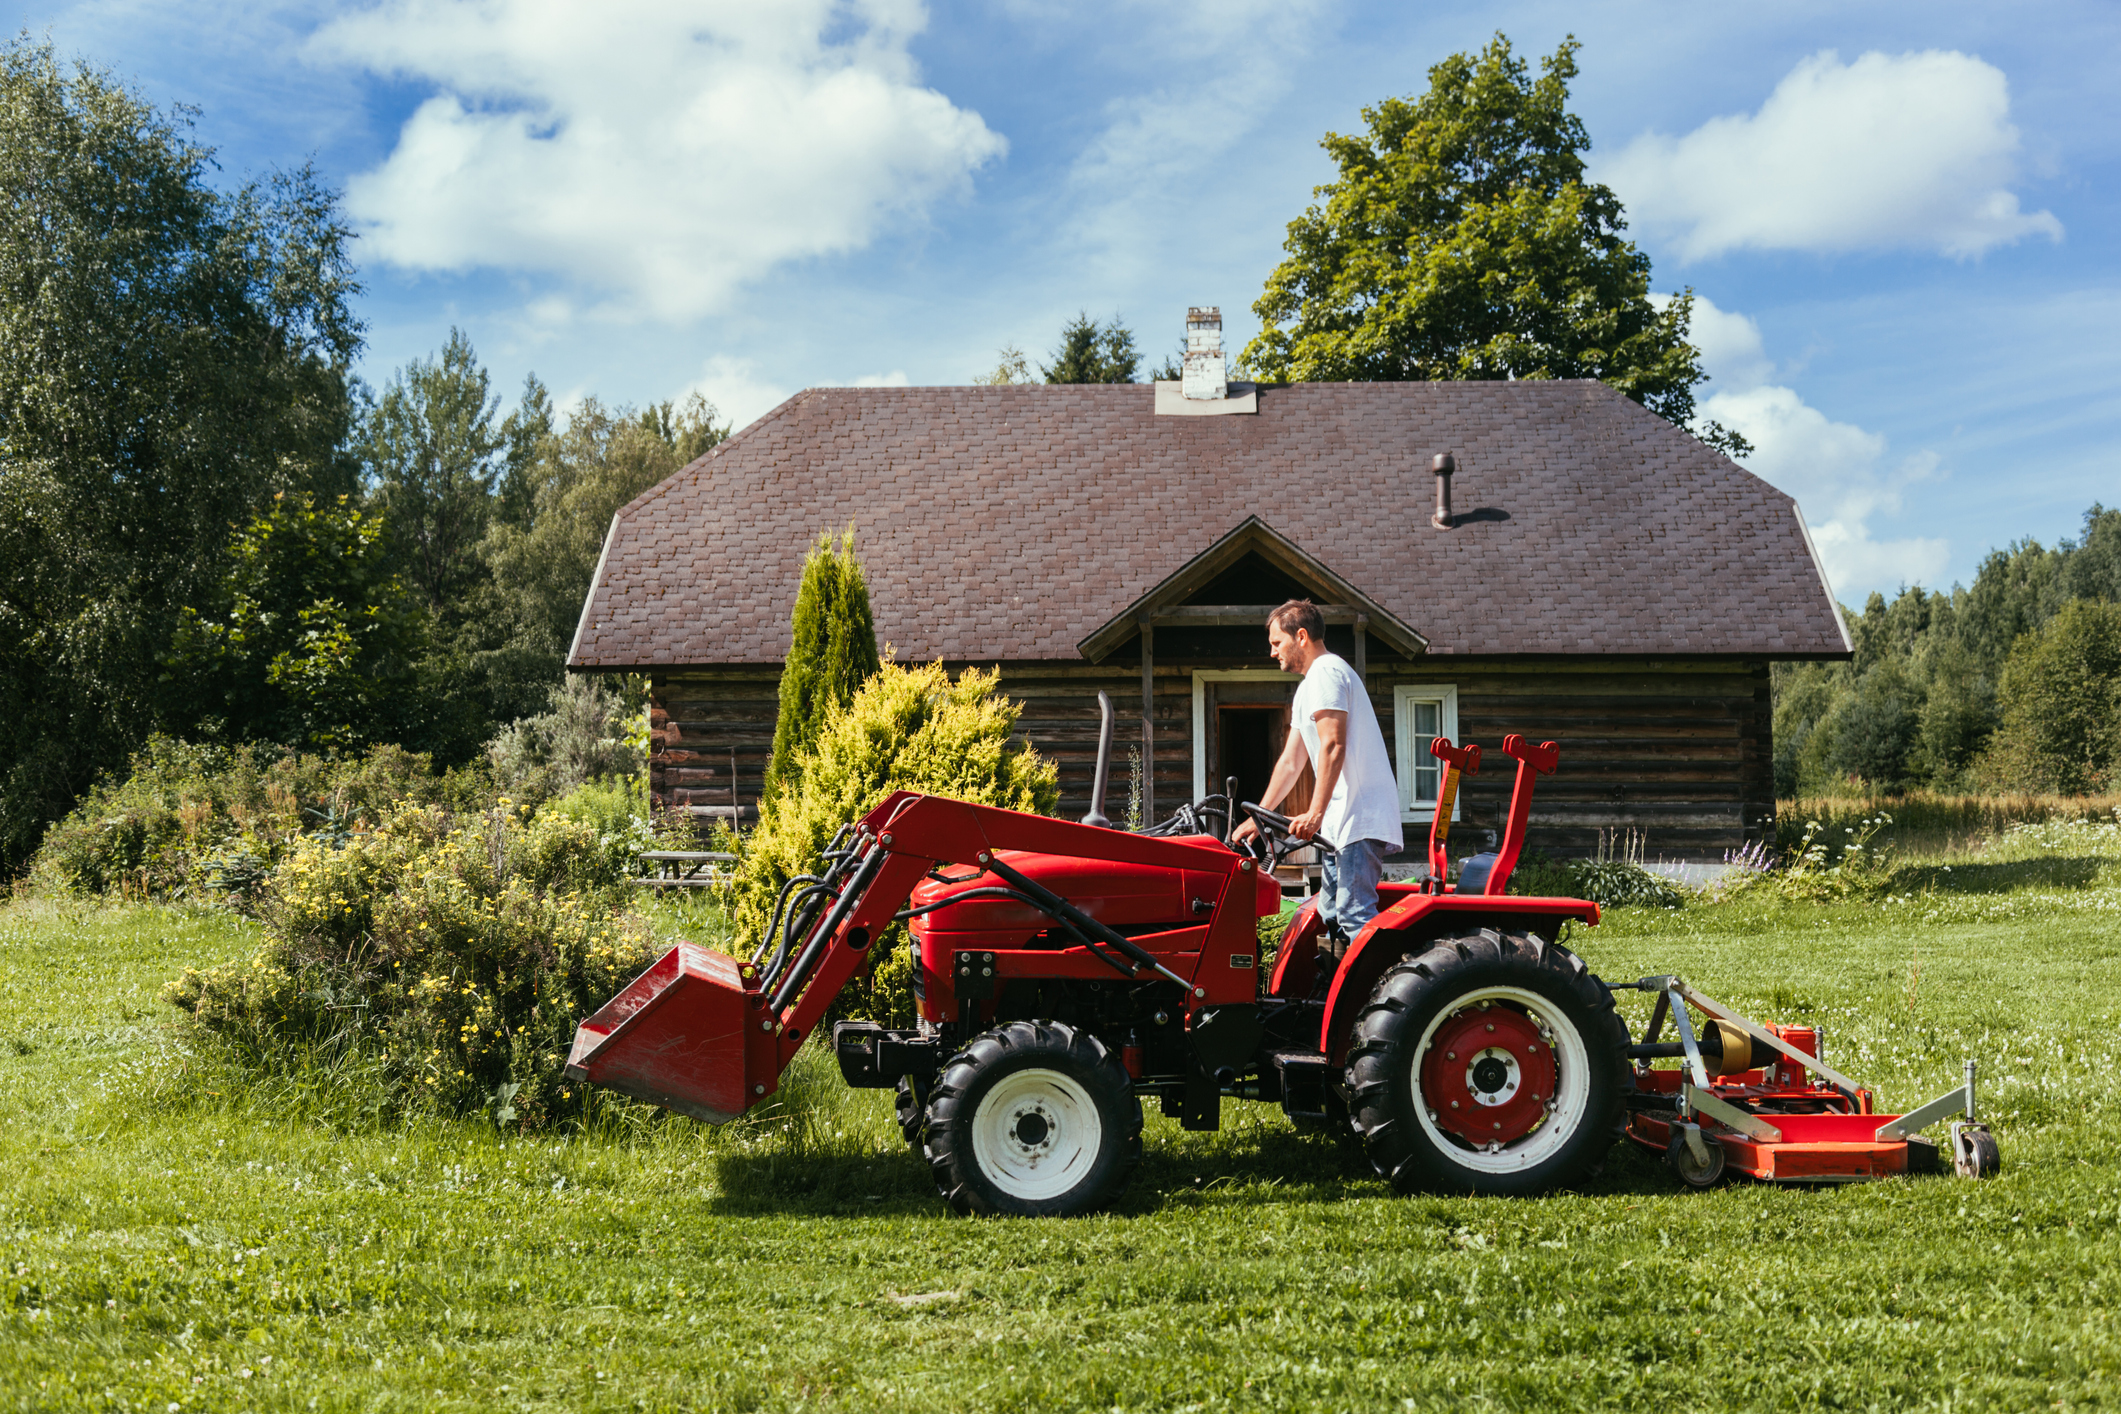 Must Have Tools, Toys and Tractors for Rural Acreage